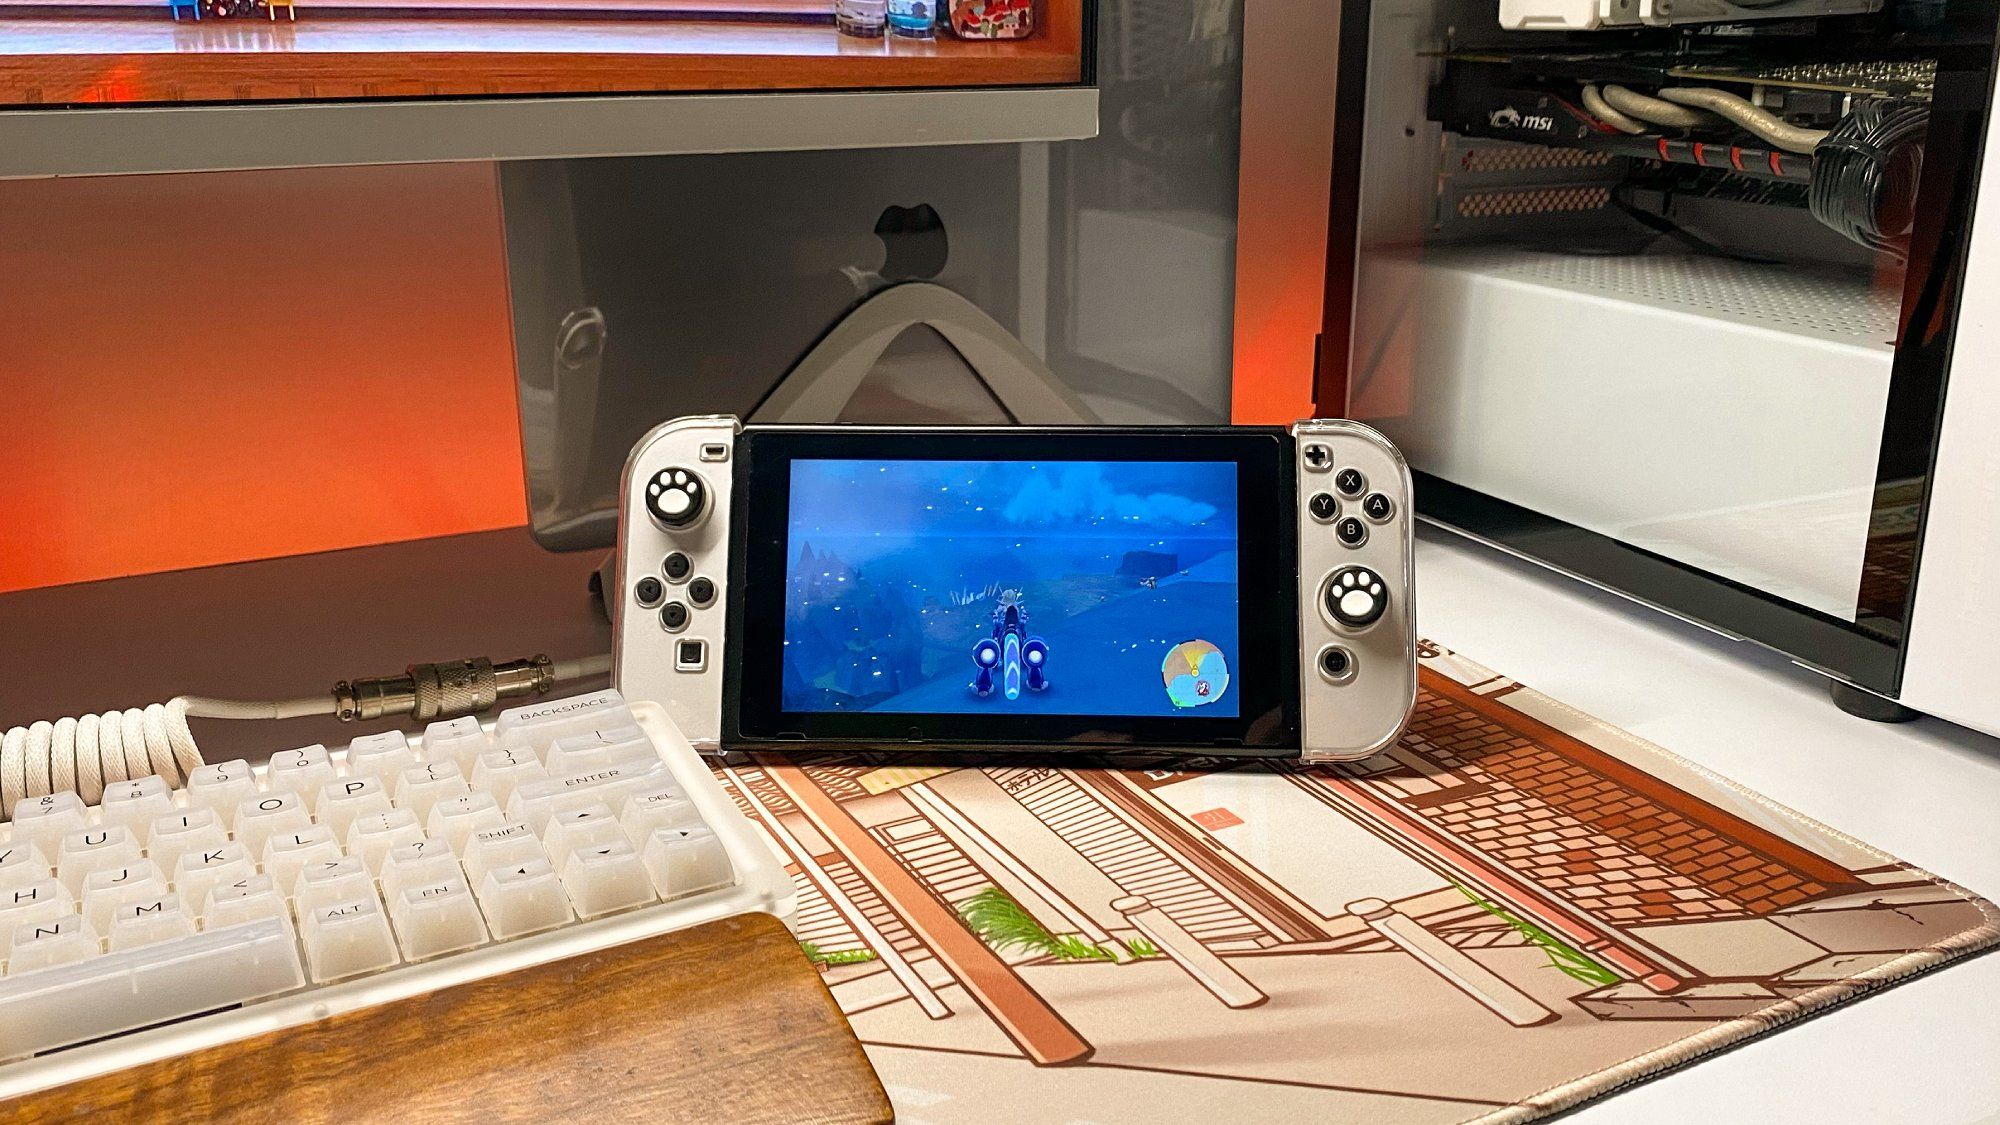 A Nintendo Switch game console with custom Joy-Con controllers